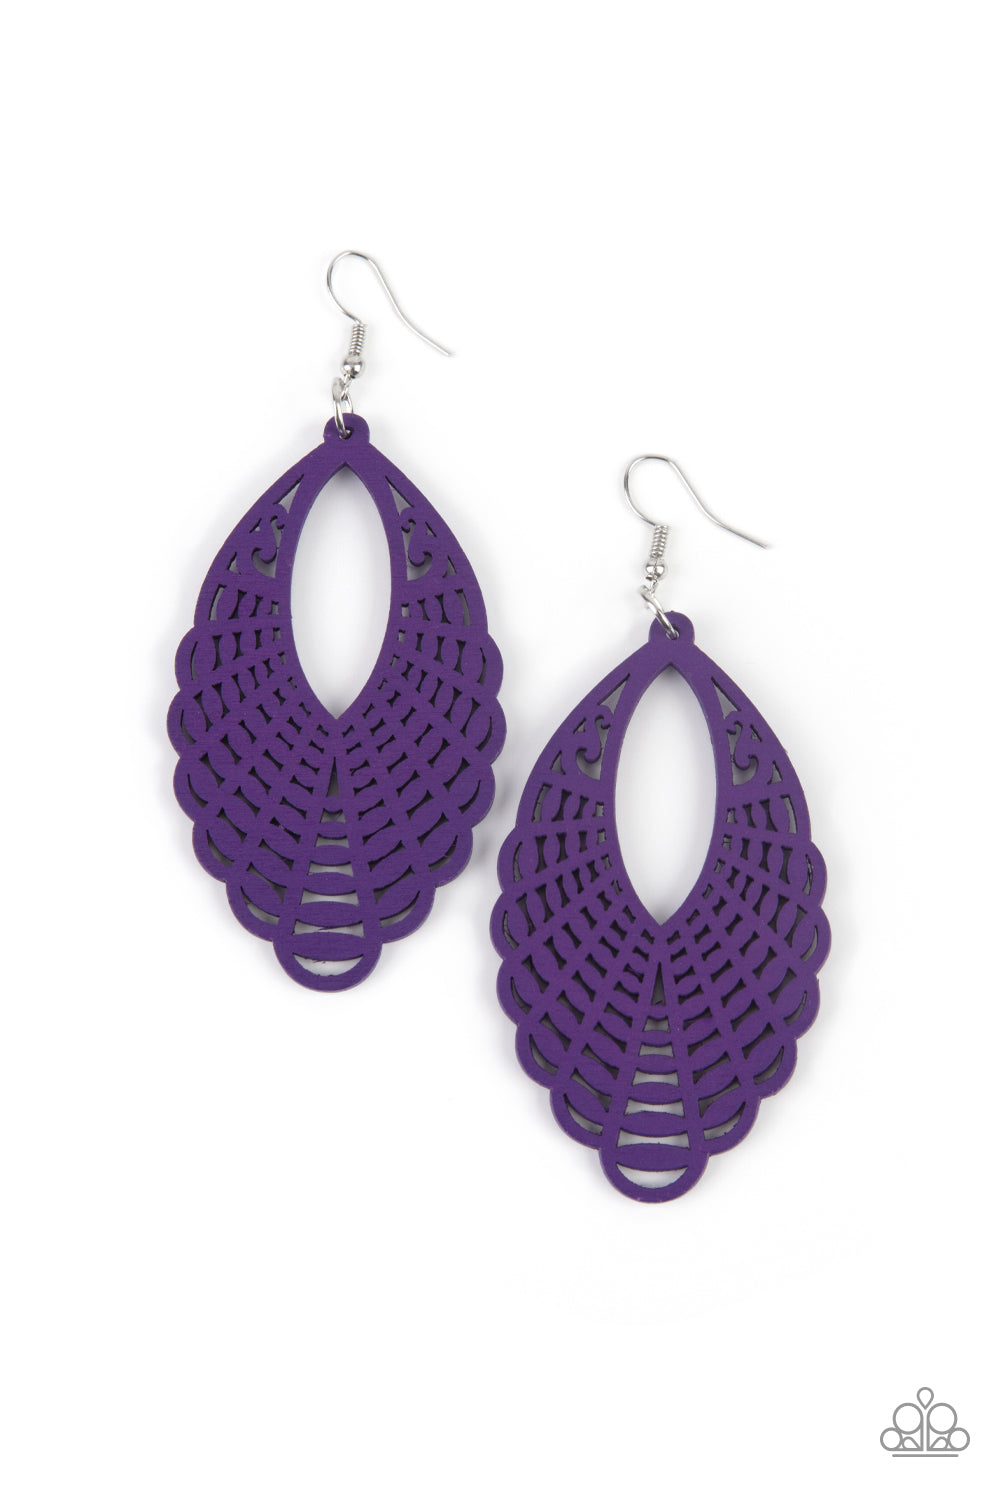 Painted in a vibrant purple finish, a wooden marquise-shaped frame features a mandala-inspired cut-out design creating a dreamy lure that calls to the wanderlust adventure seeker. Earring attaches to a standard fishhook fitting.